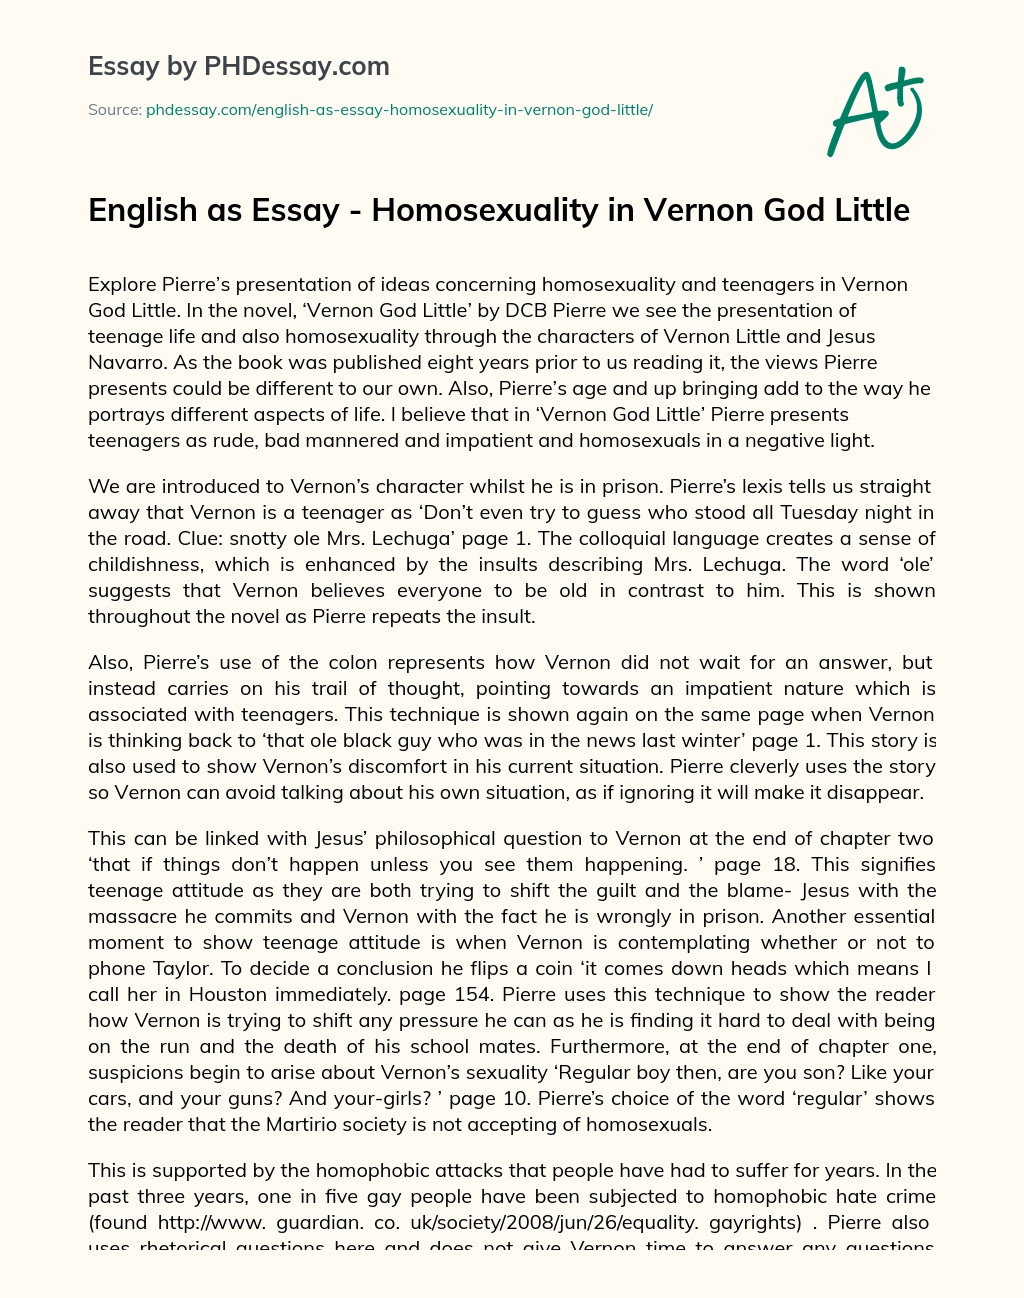 English as Essay – Homosexuality in Vernon God Little essay